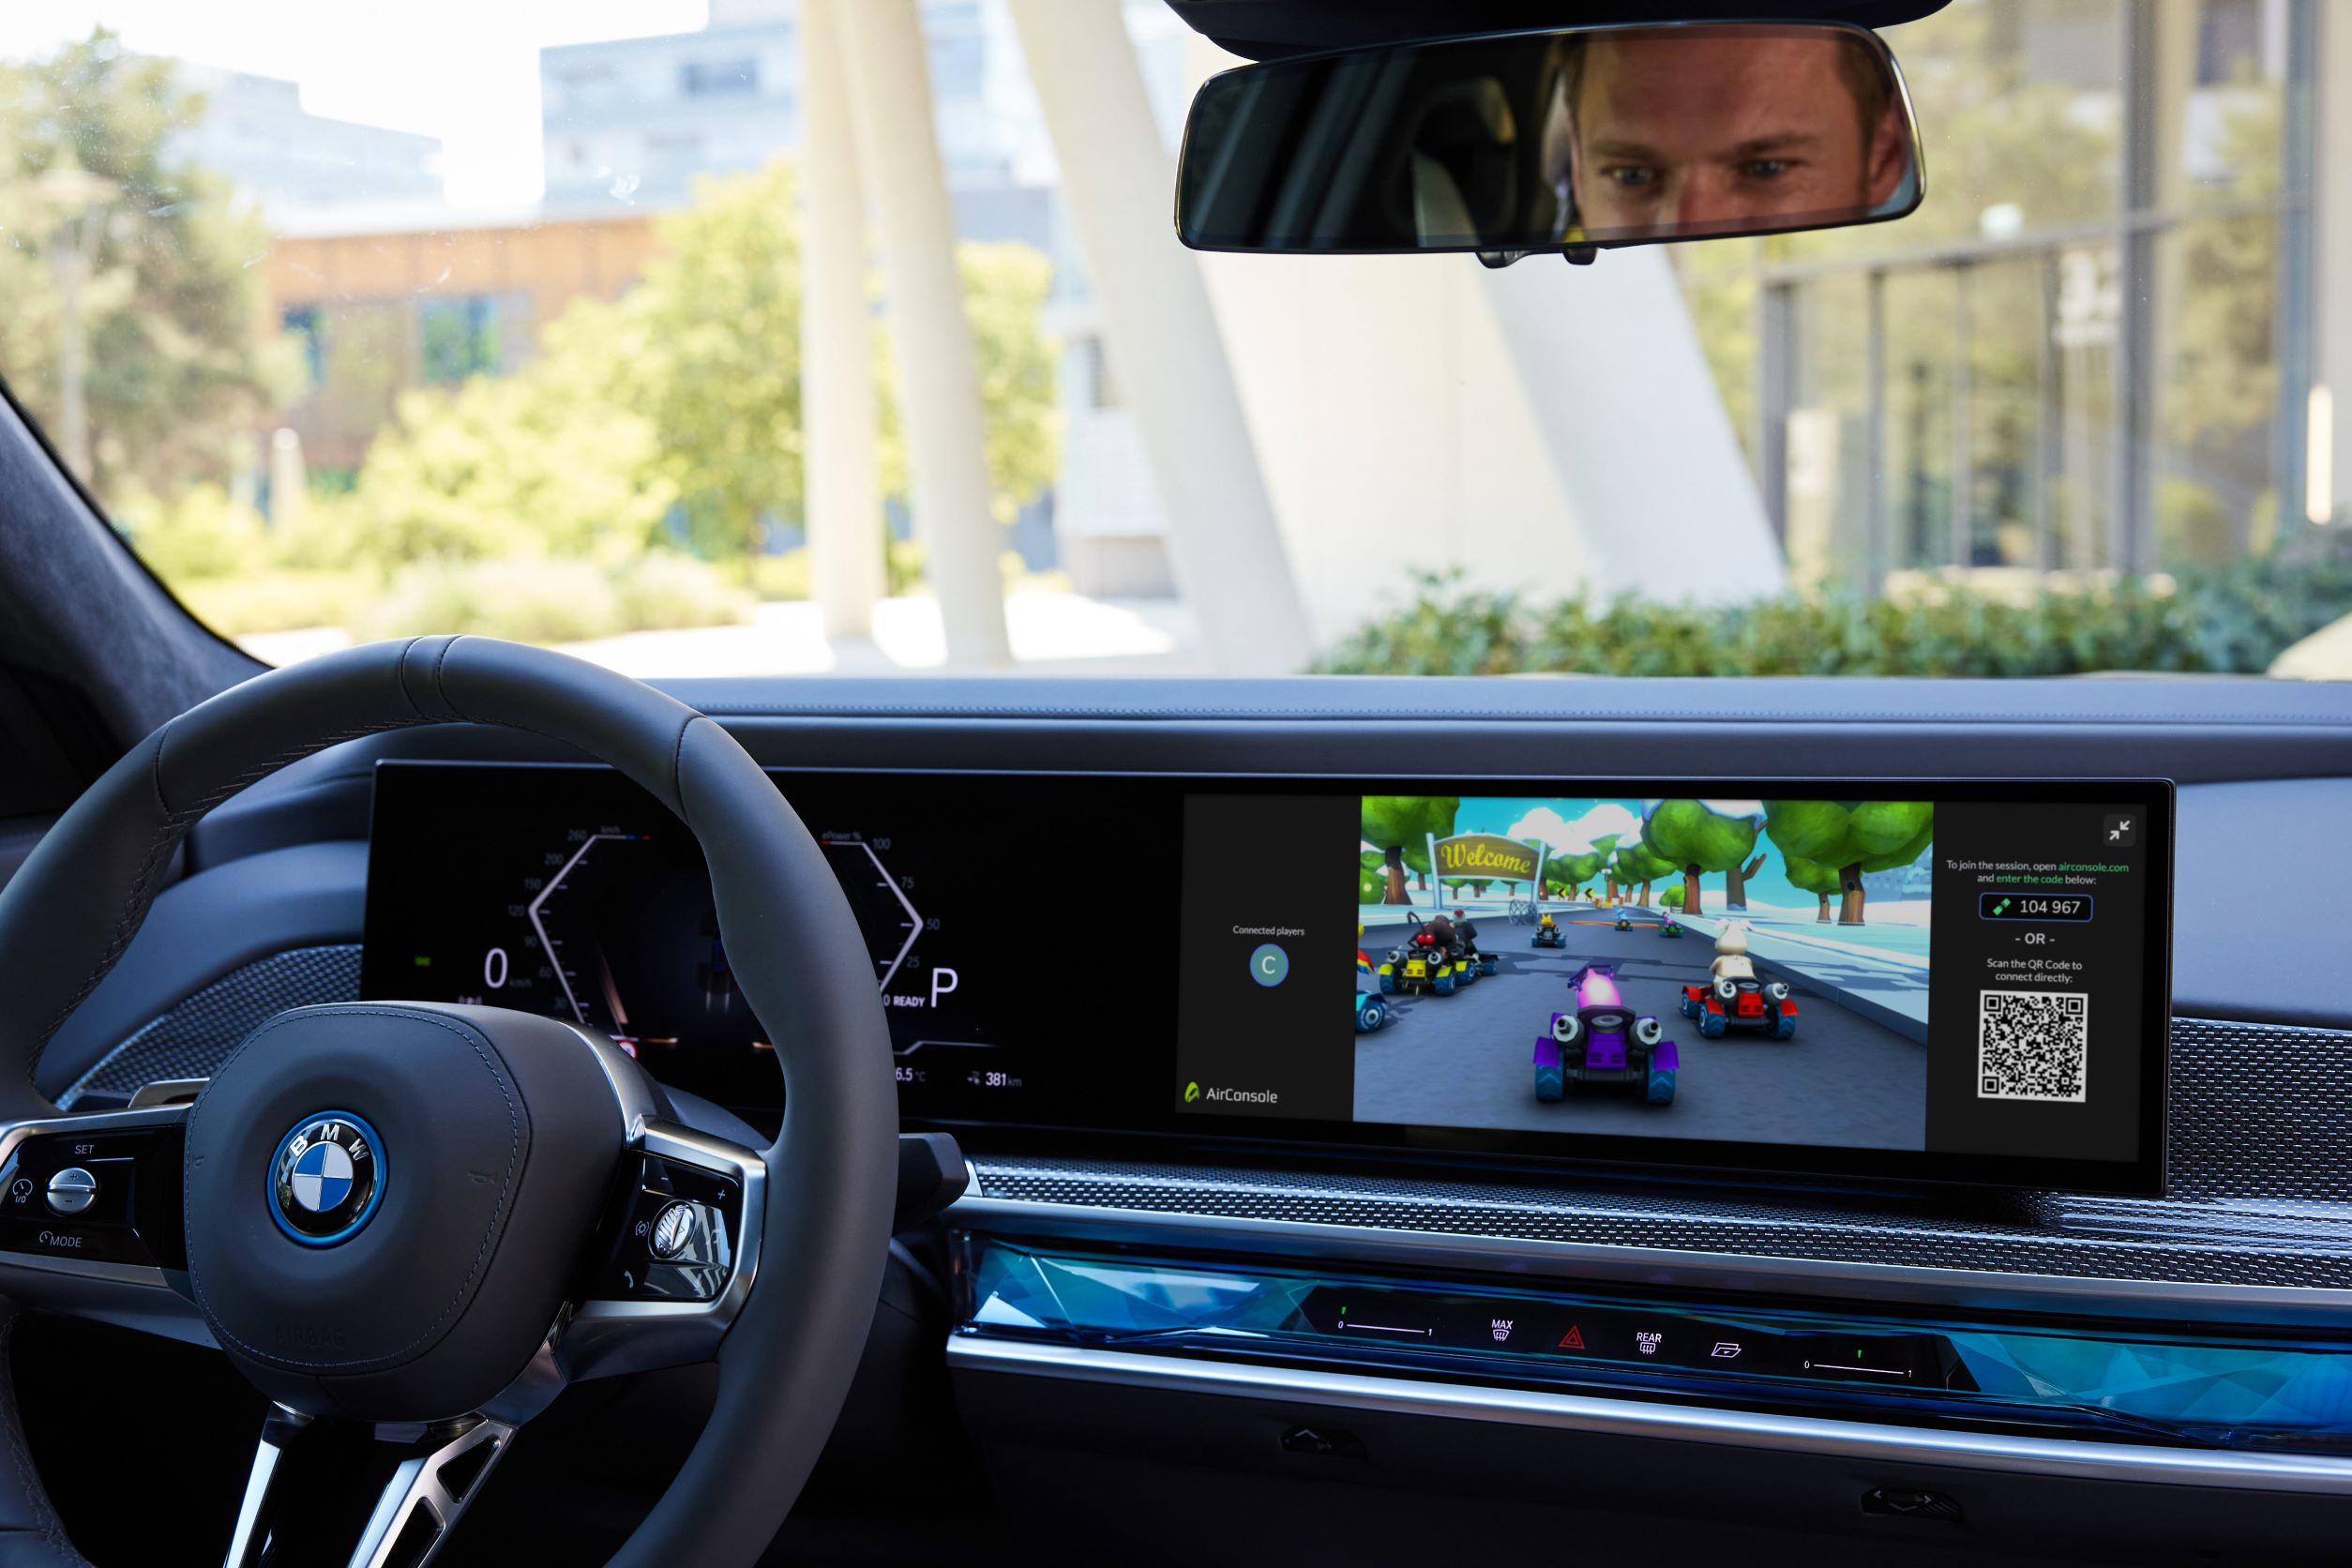 Games being played on the infotainment screen of a BMW car